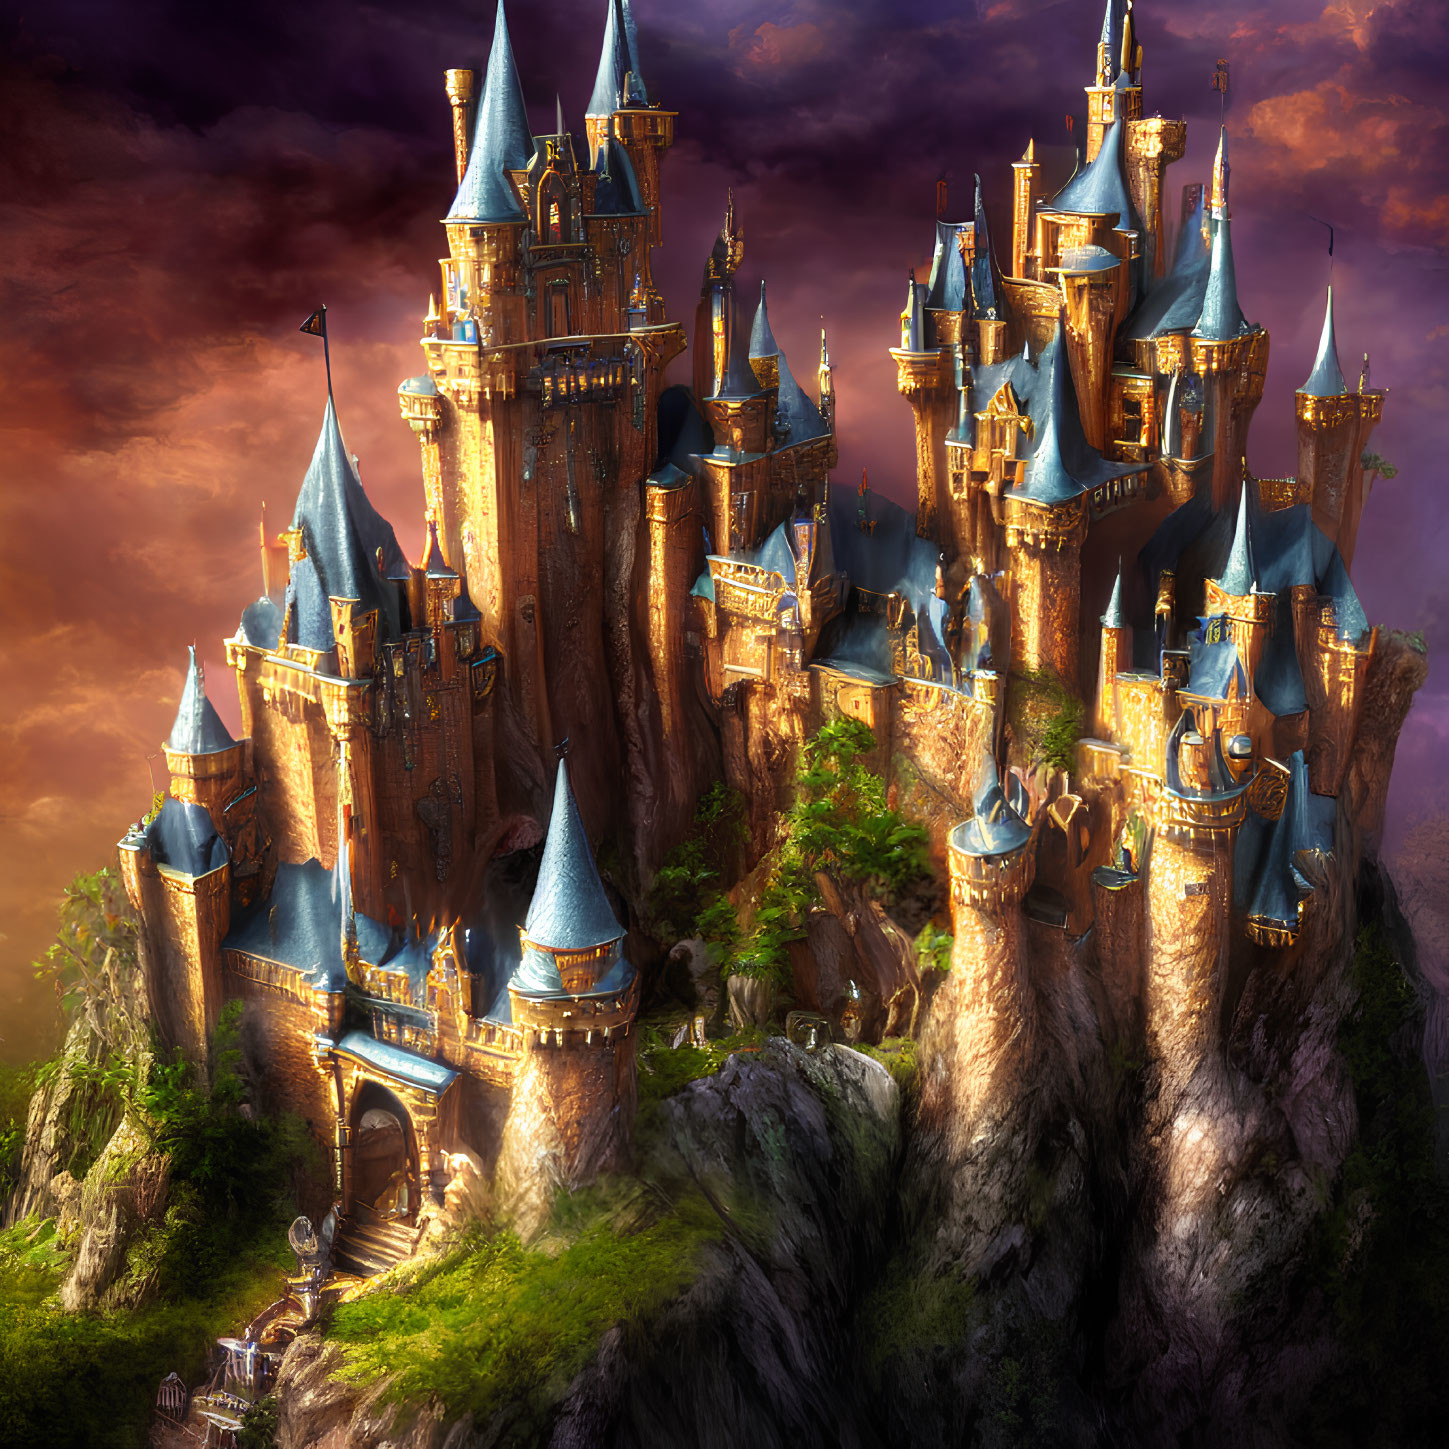 Fairy-tale castle with spires, towers, and bridges at sunset